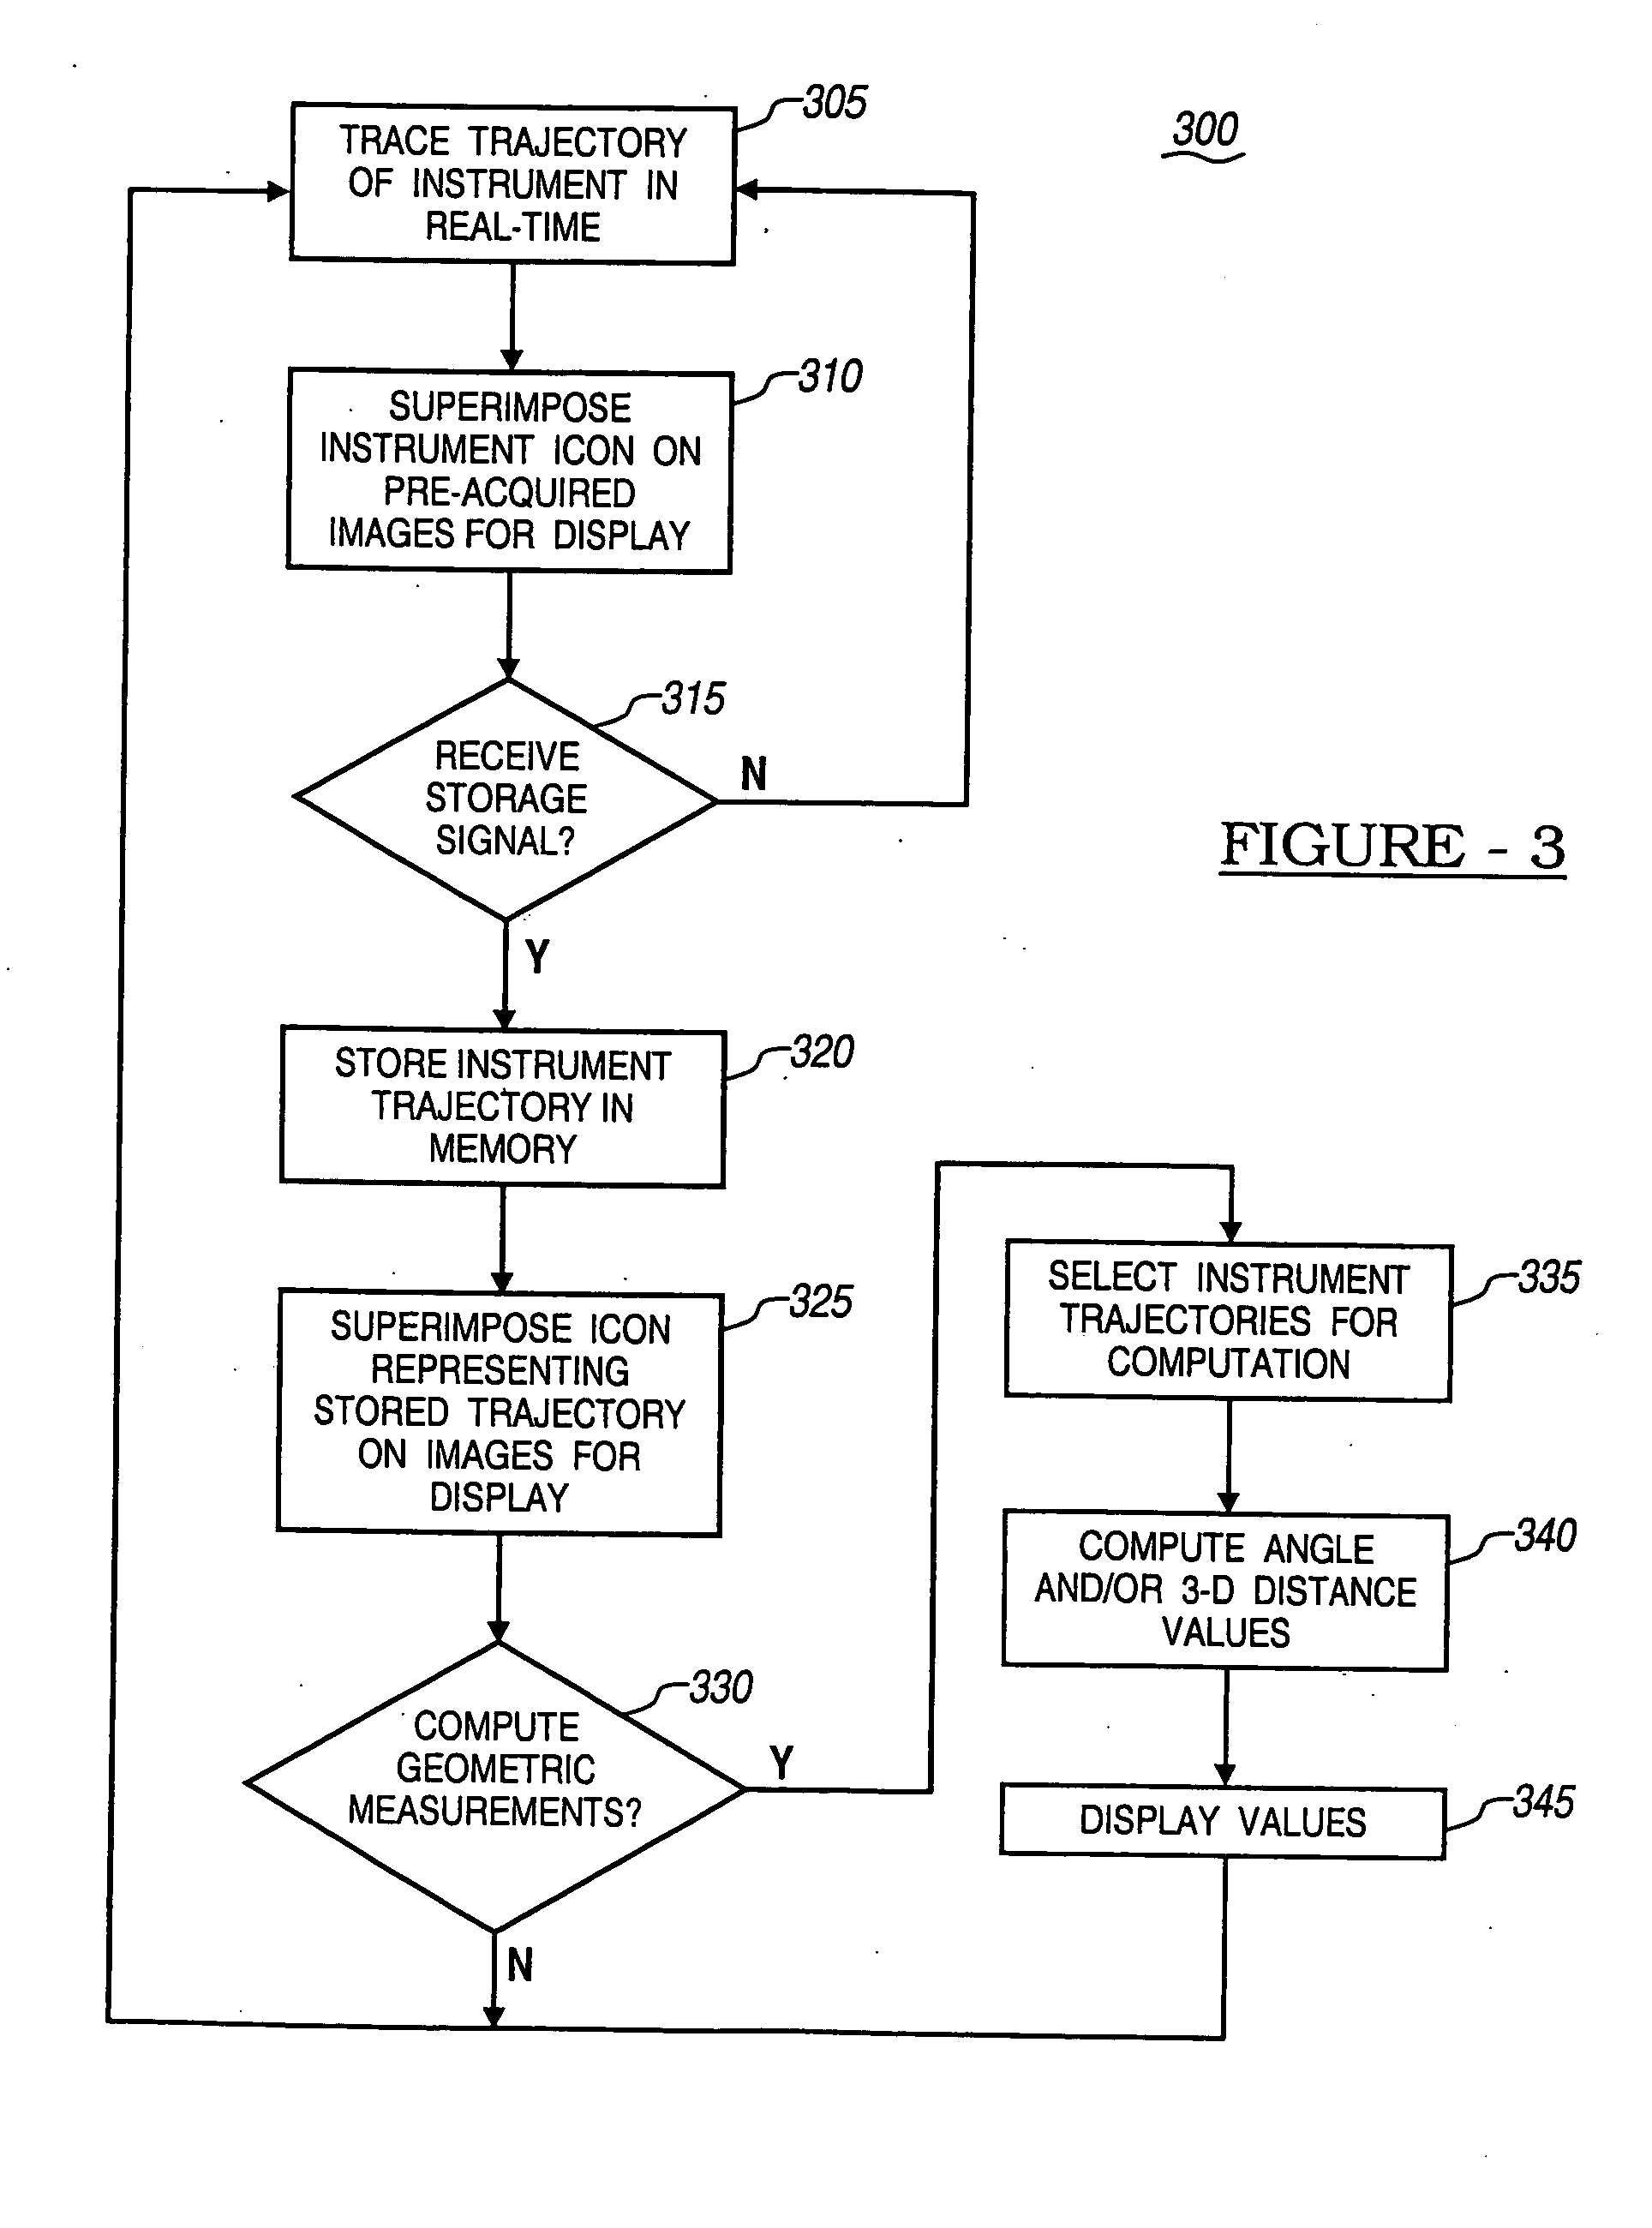 Trajectory storage apparatus and method for surgical navigation systems